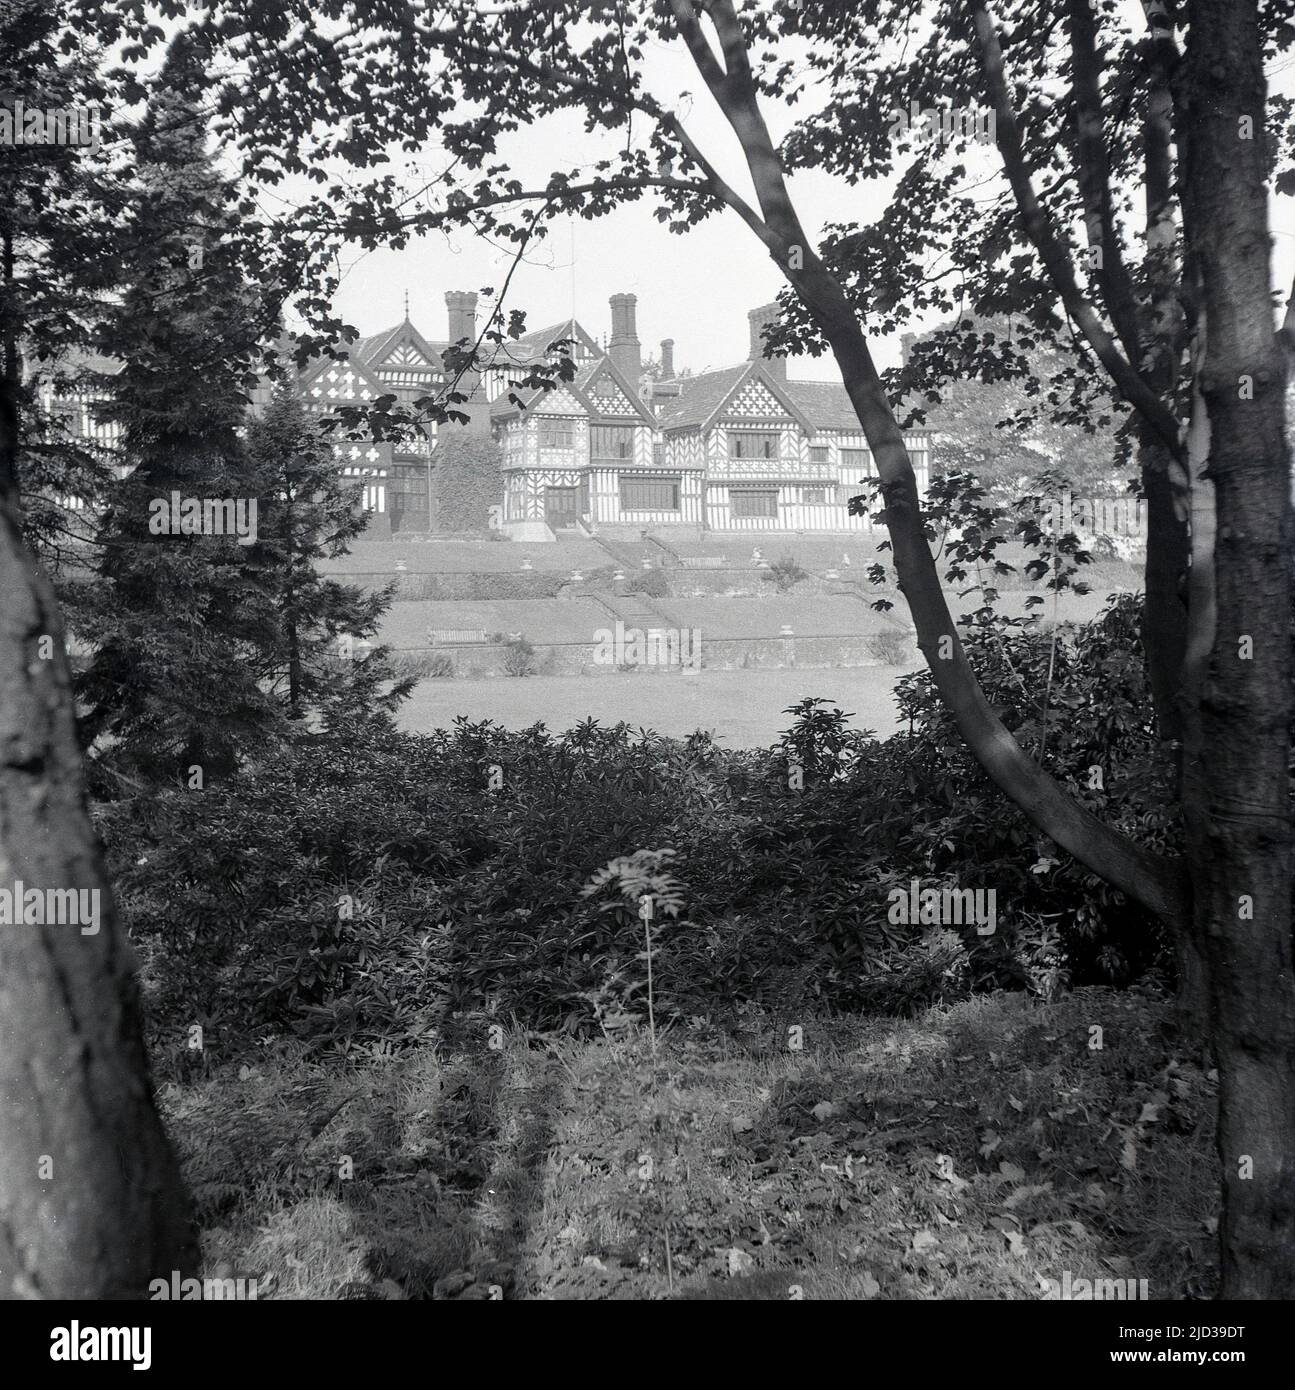 1940s, historical, distant  view through trees of Bramall Hall, Bramhall, Stockport, England, UK. A timber-framed Tudor manor house that dates back to the 14th century, with later additions, the house and surrounding parkland was acquired by the local authority in 1935 and became a museum. The Davenport family, which it is believed built the house, held the manor for over 500 years. Stock Photo